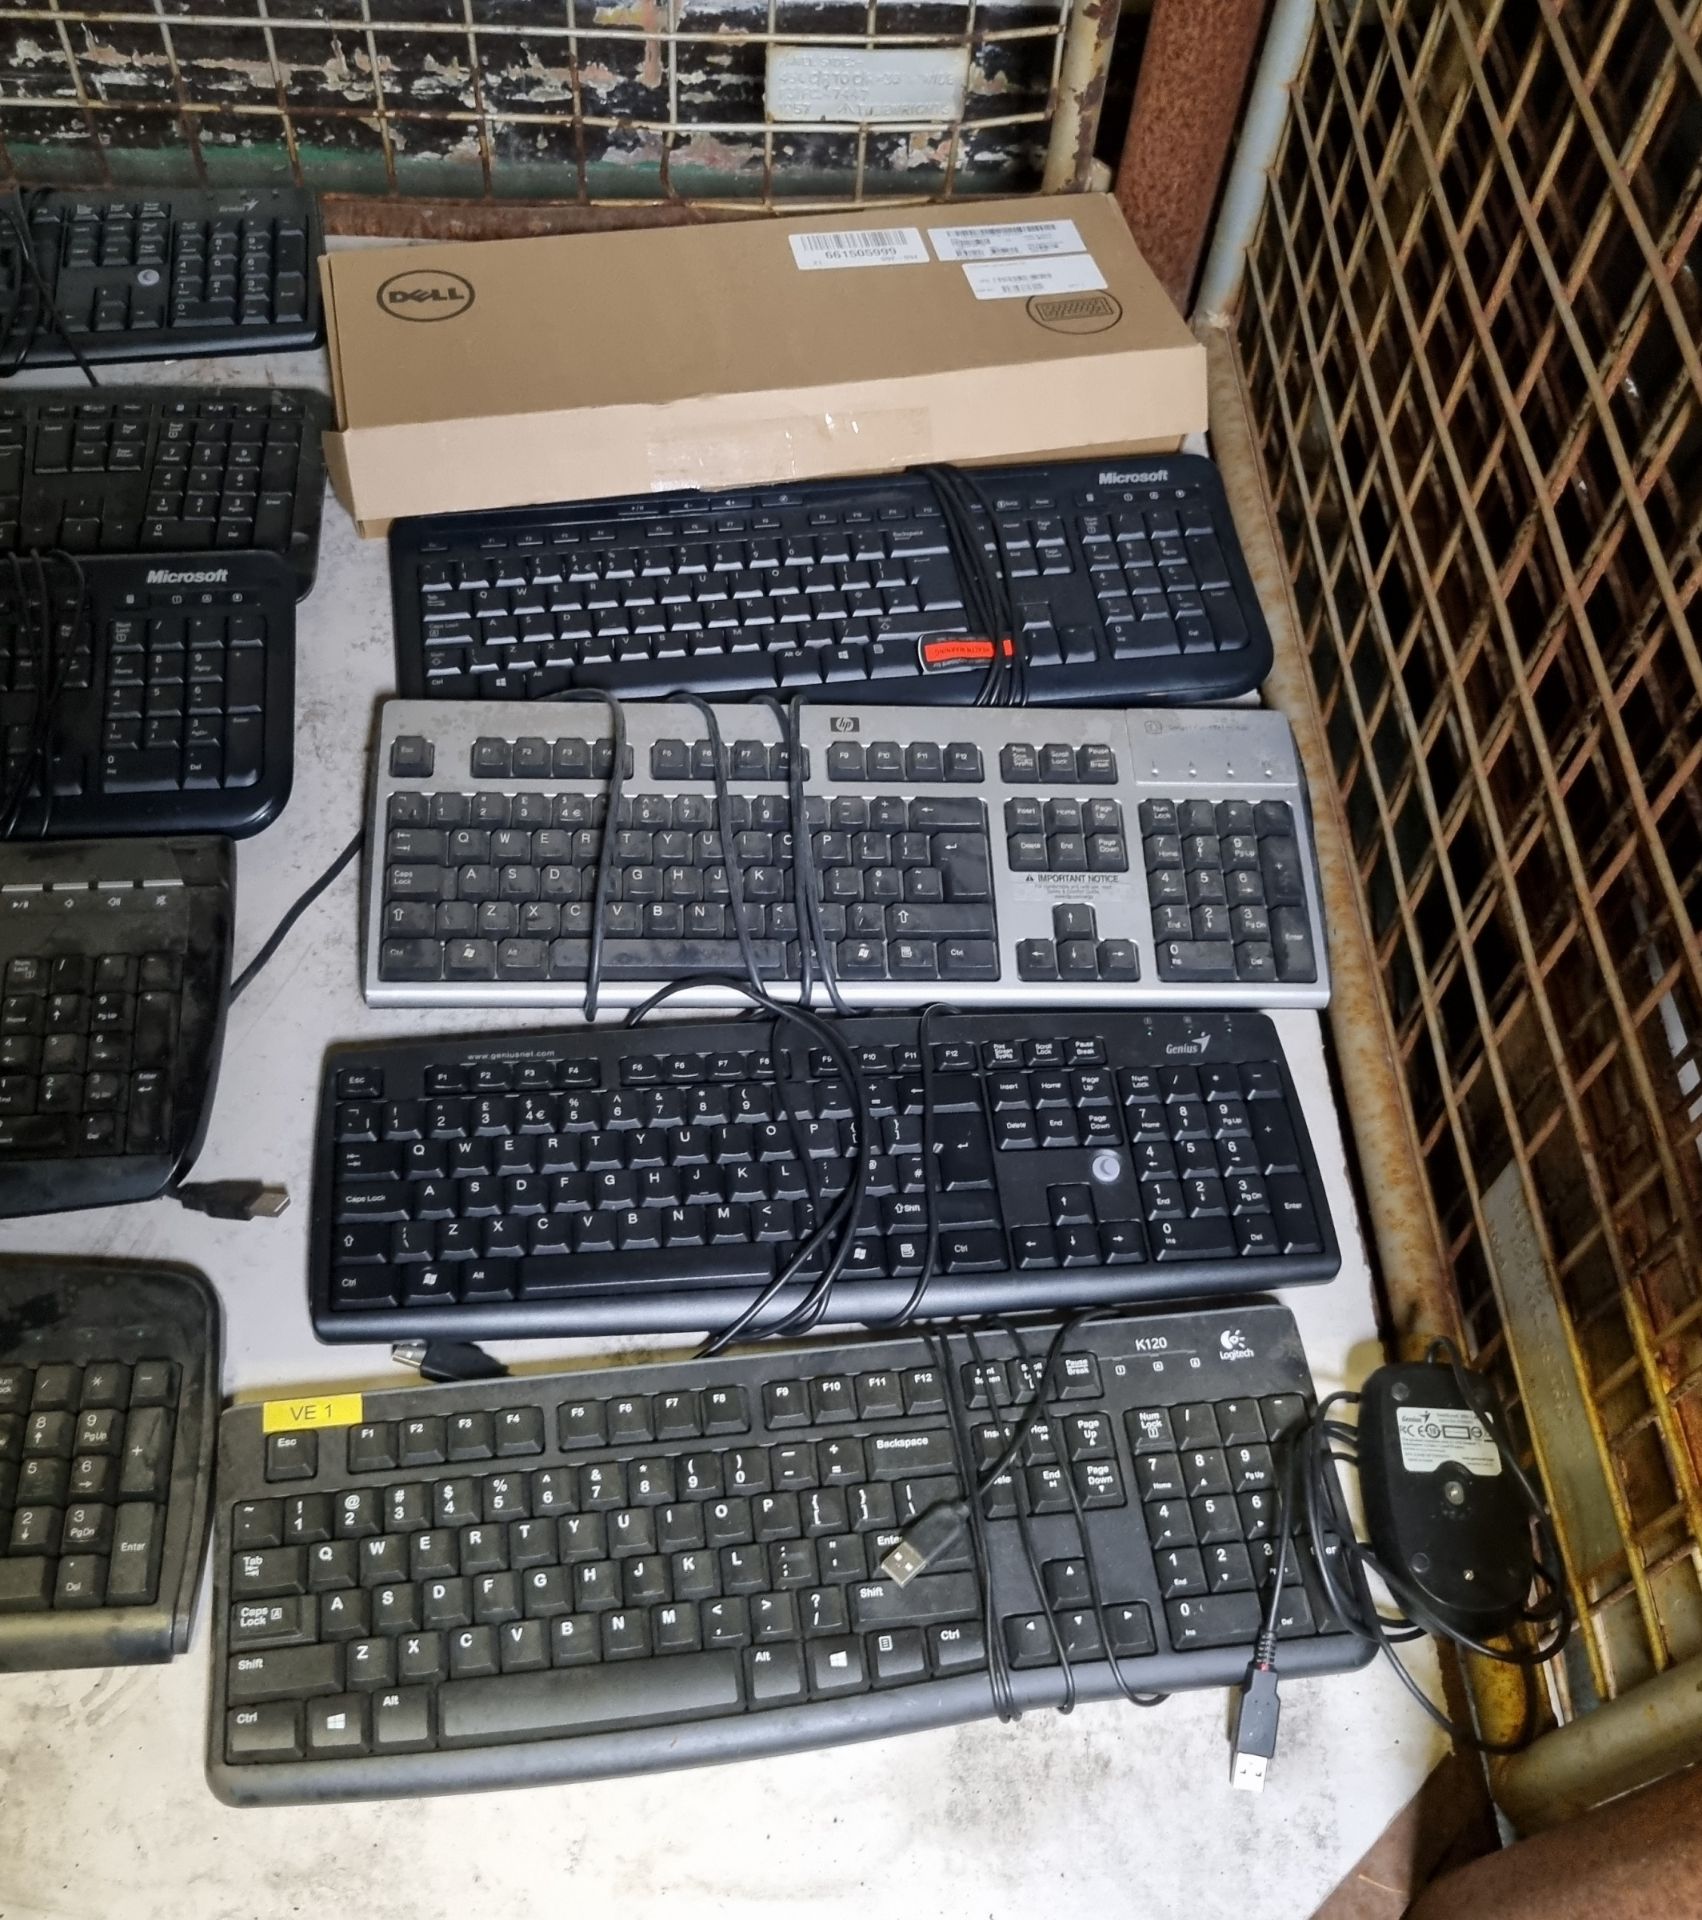 10x wired and wireless keyboards - 13x wired mice - Image 2 of 3